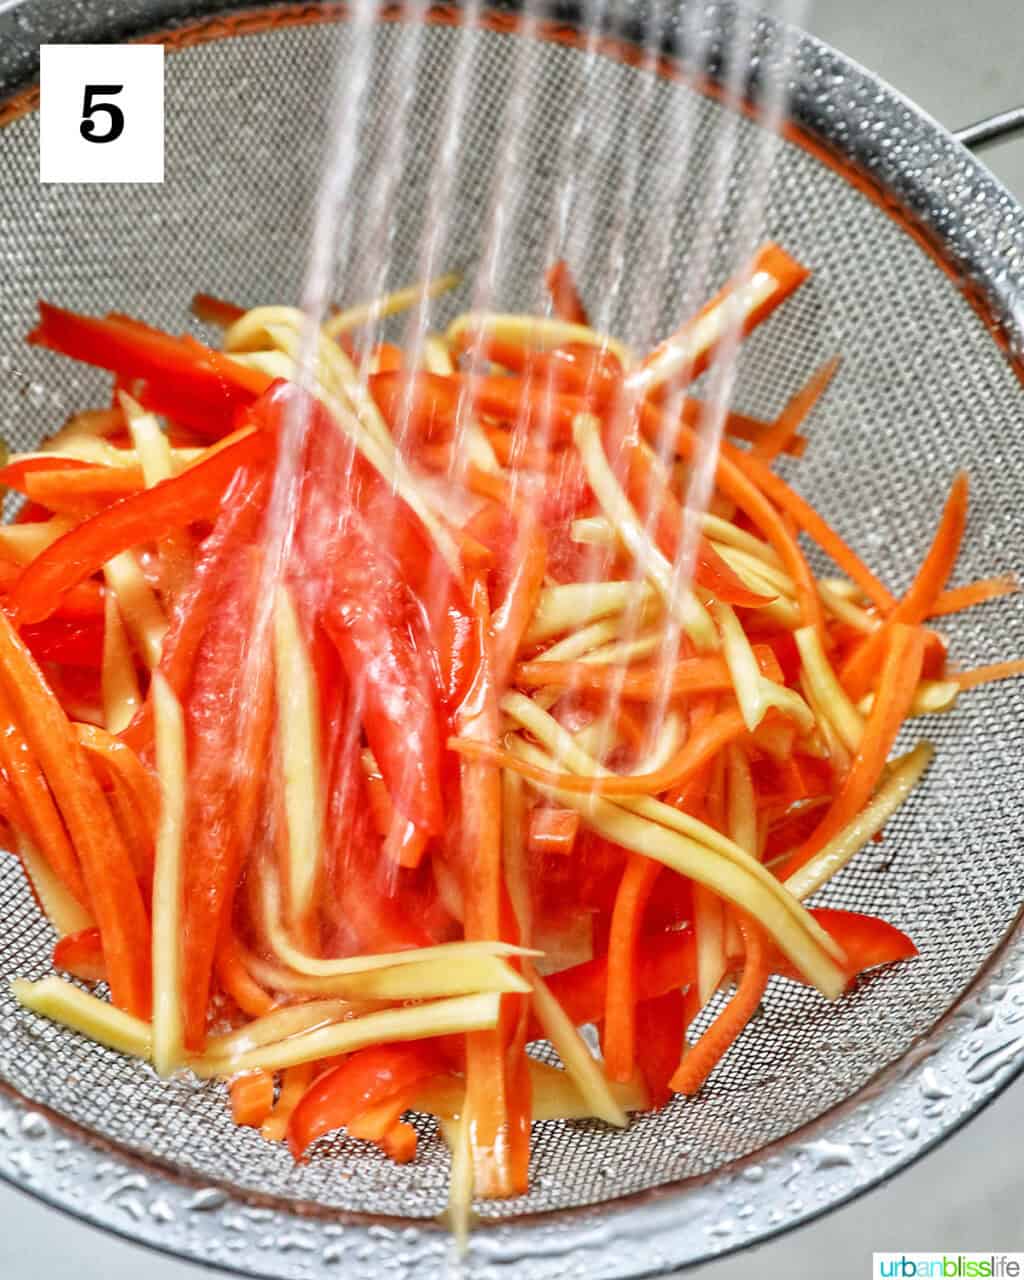 water spraying on sliced papaya, carrots, red bell pepper in a bowl.